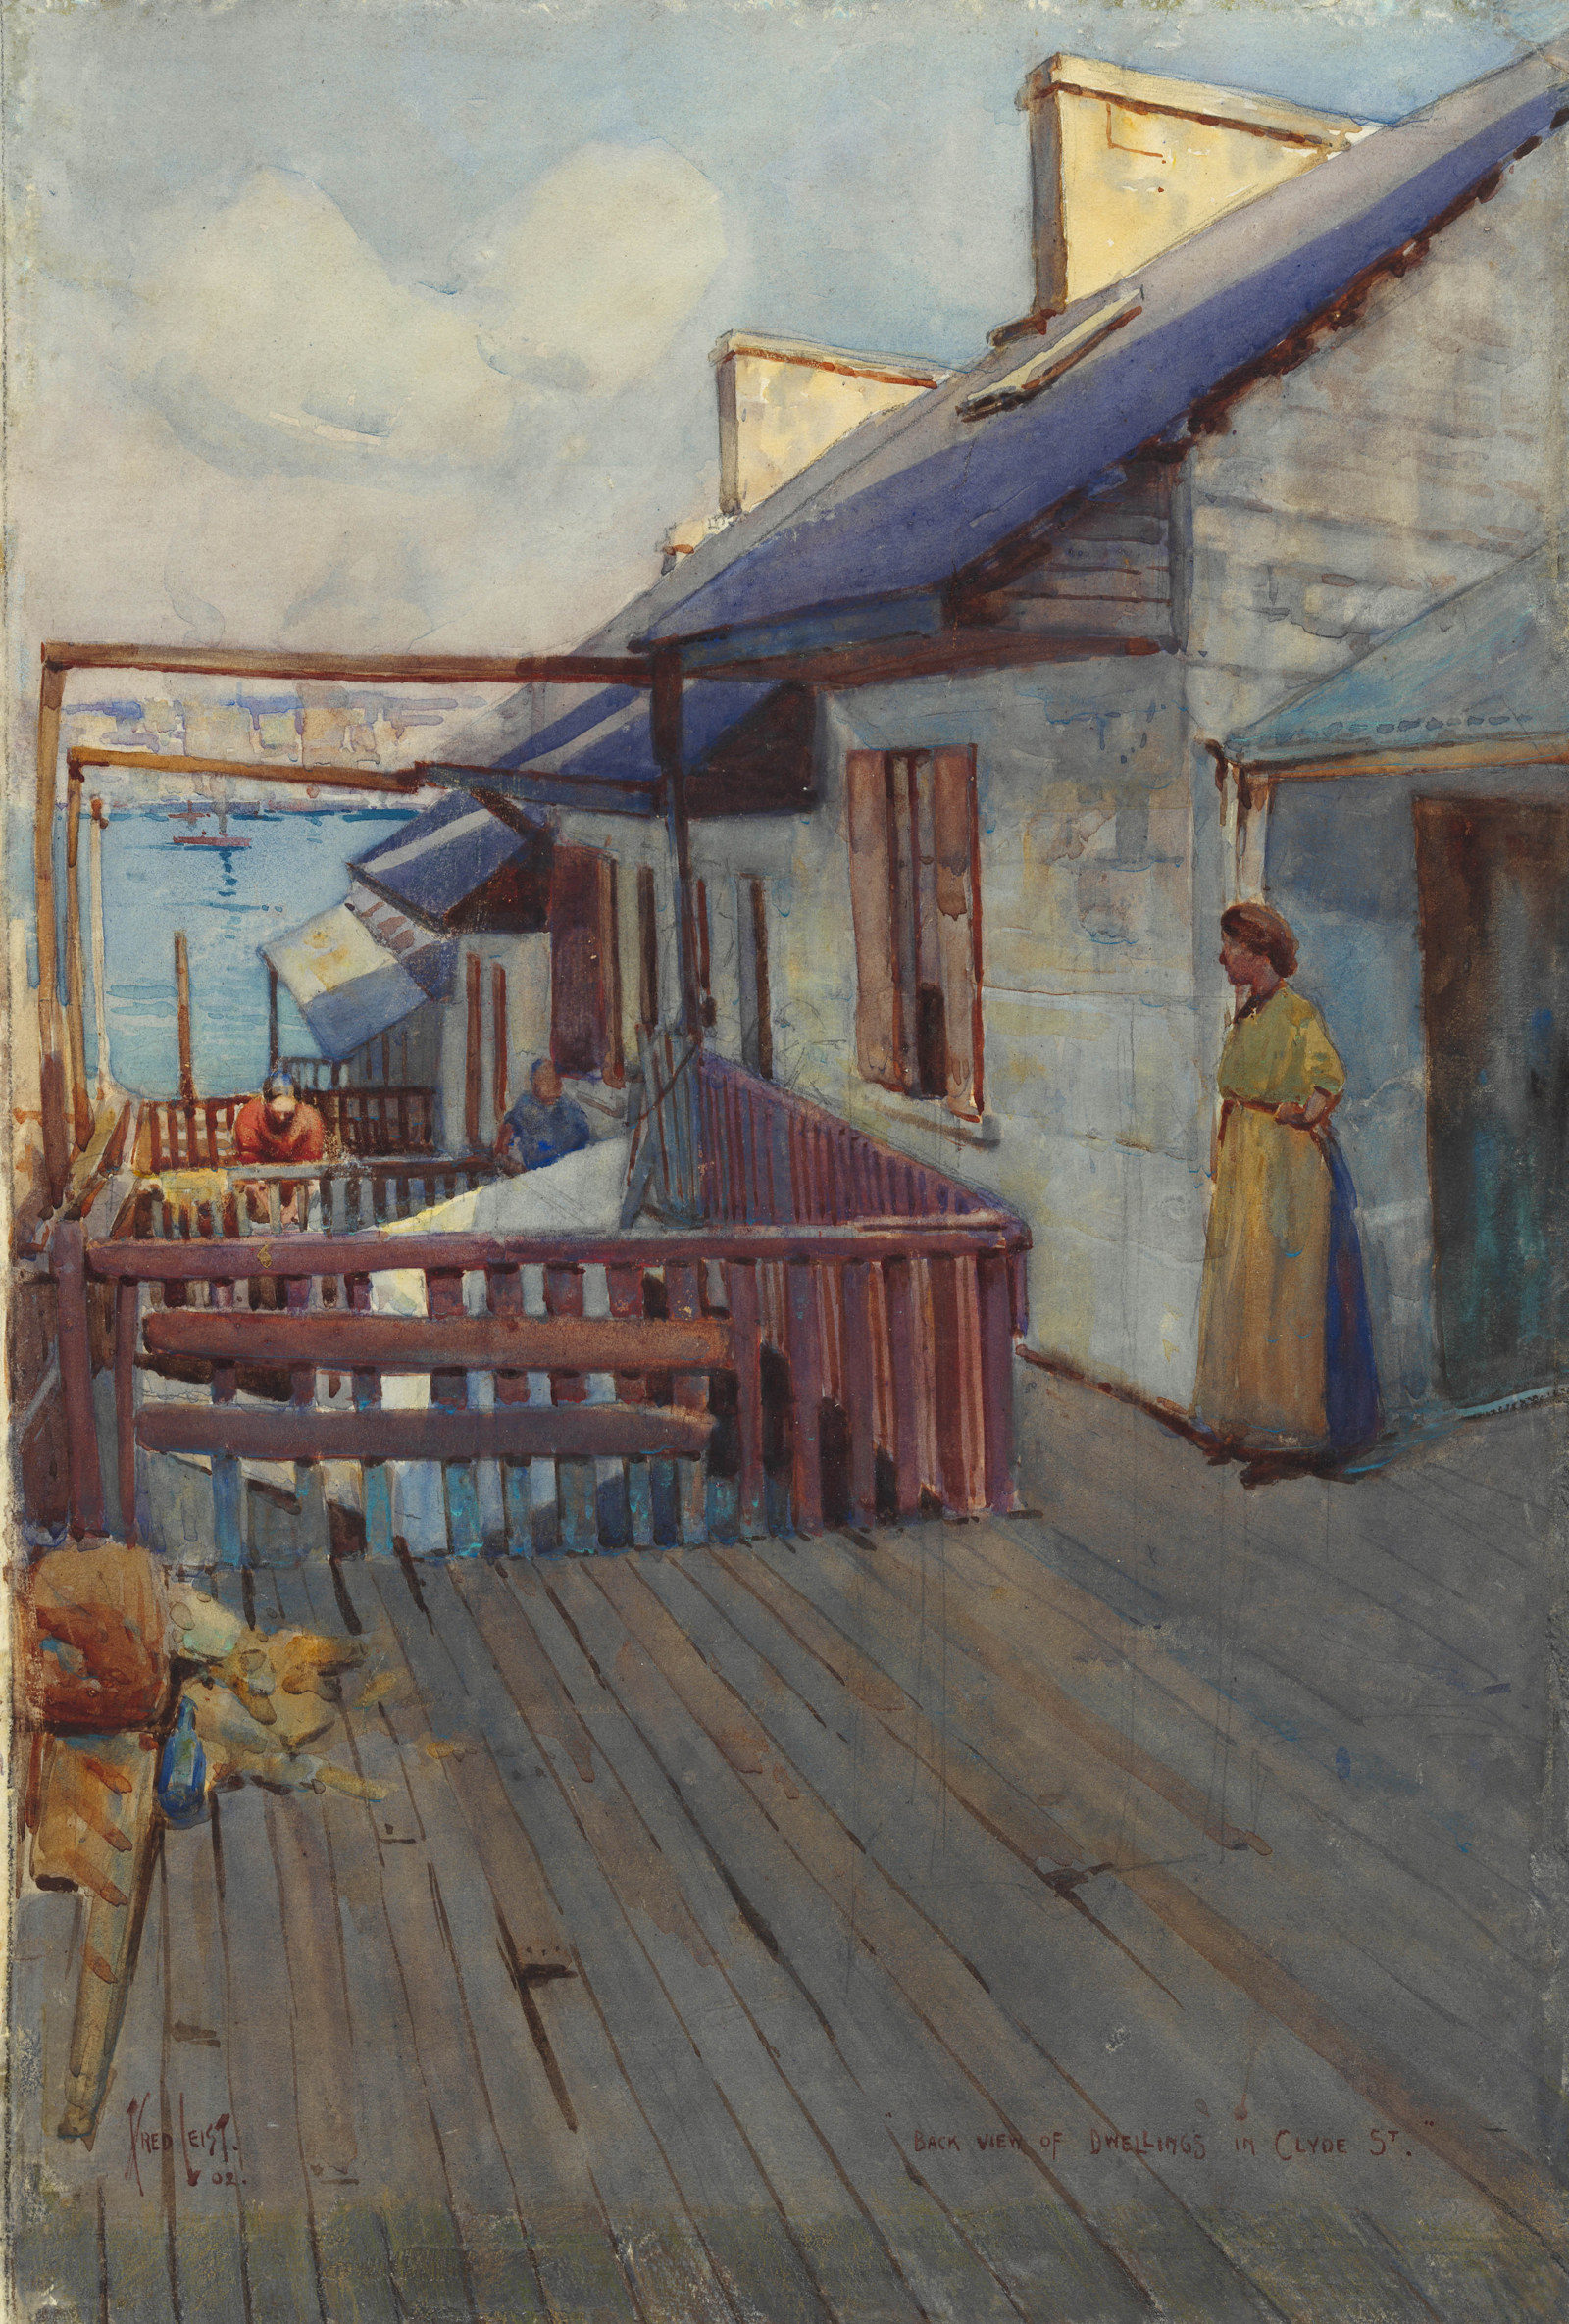 Painting showing a lady looking out over the back verandas of a row of terrace houses leading down to the water.